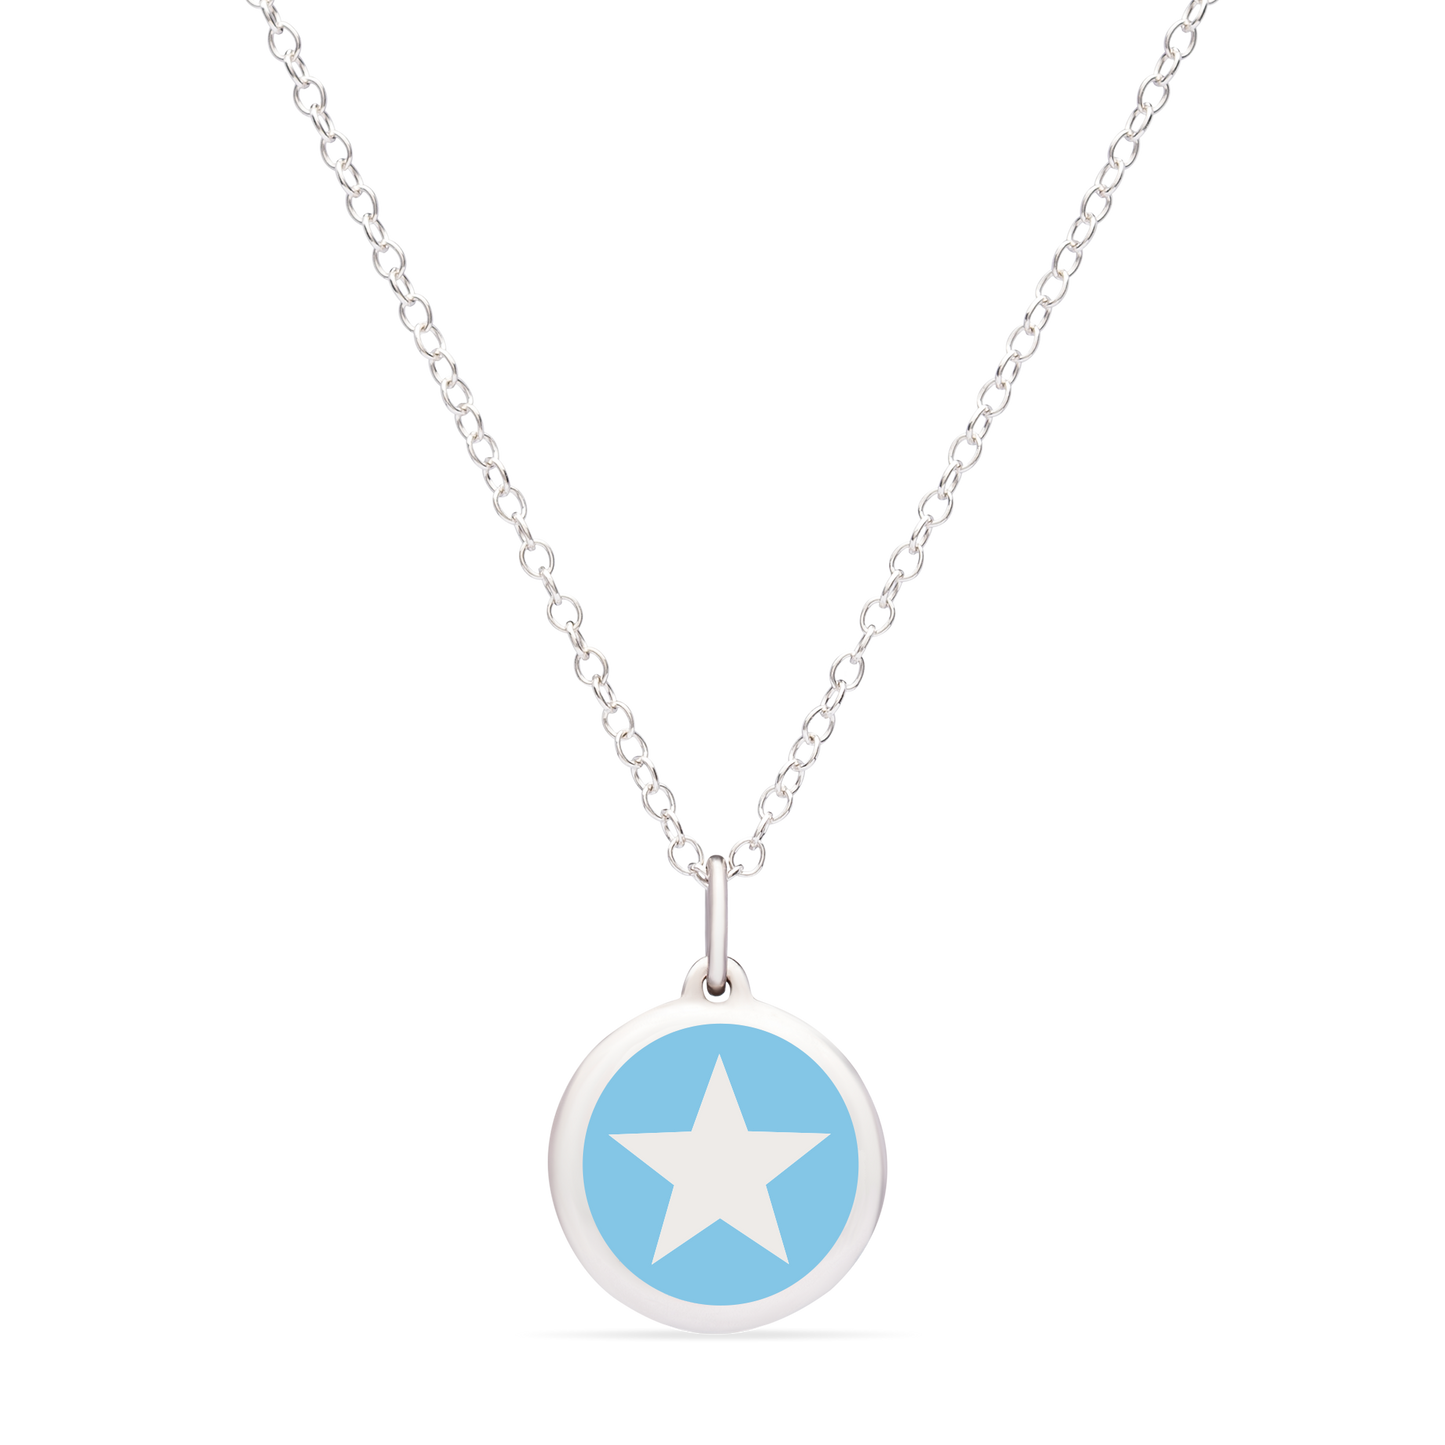 MINI STAR CHARM sterling silver with rhodium plate